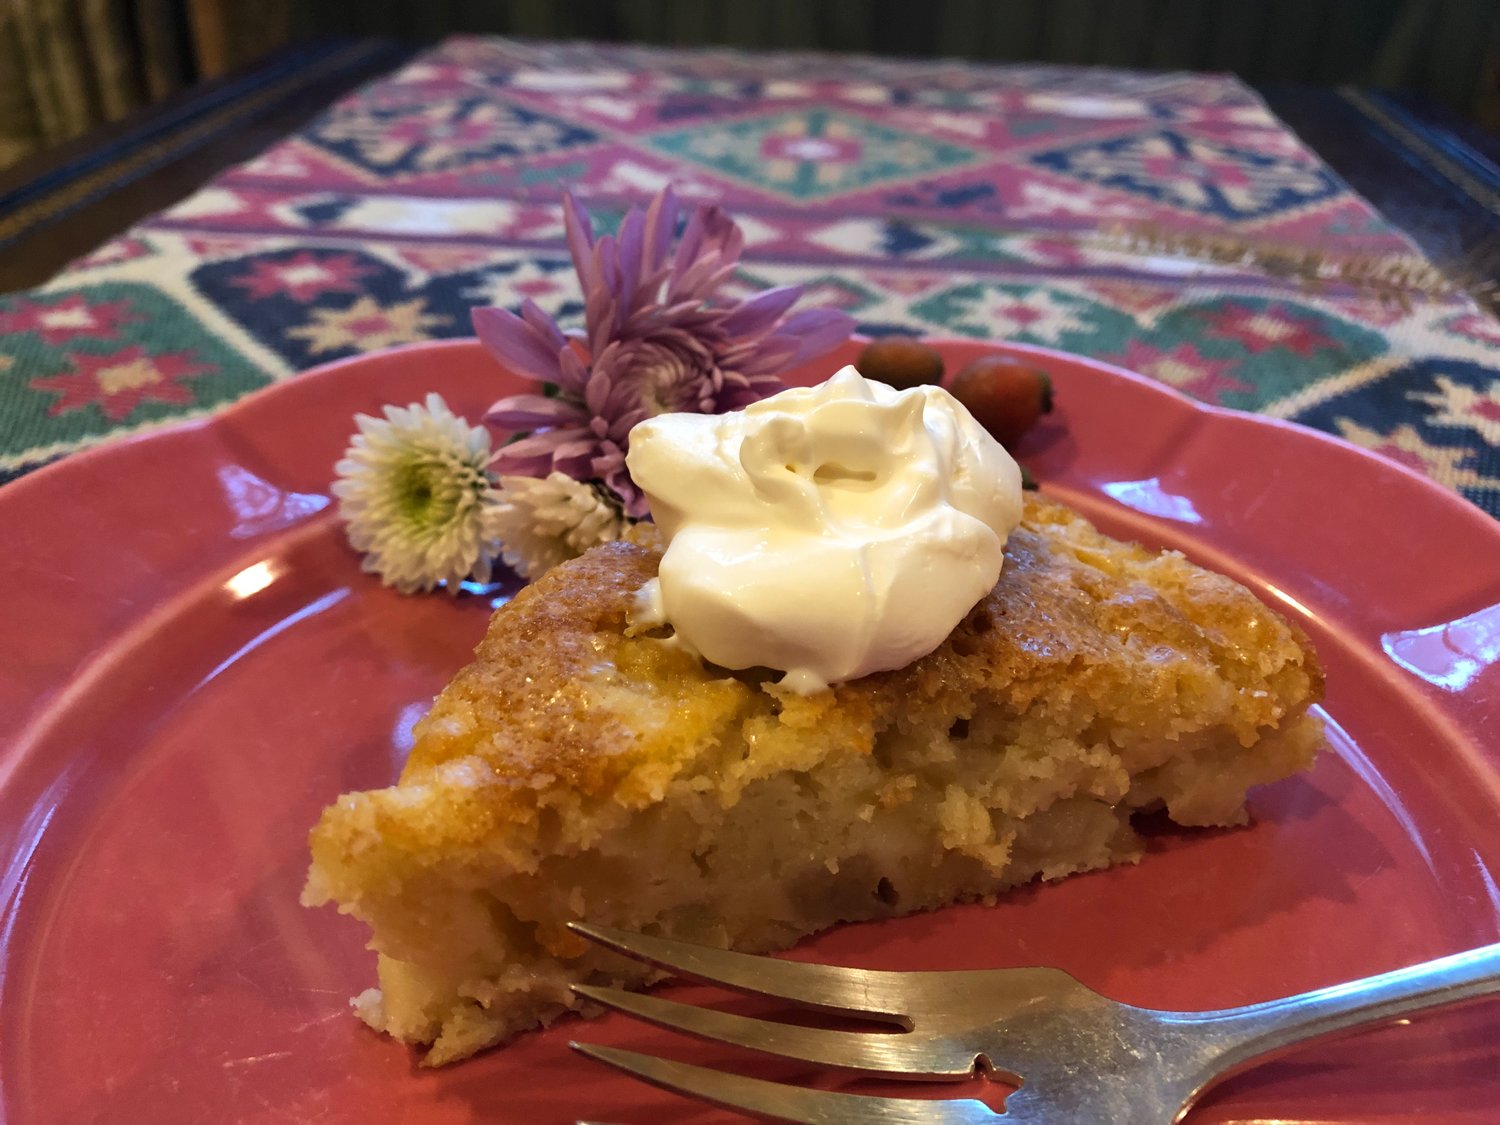 While traditional French apple cakes are typically made with rum, I& M food wrtier Sarah Leah Chase prefers to use Calvados – Normandy’s apple brandy – or Cognac instead. The flavor of the alcohol does not end up dominant in the end result.